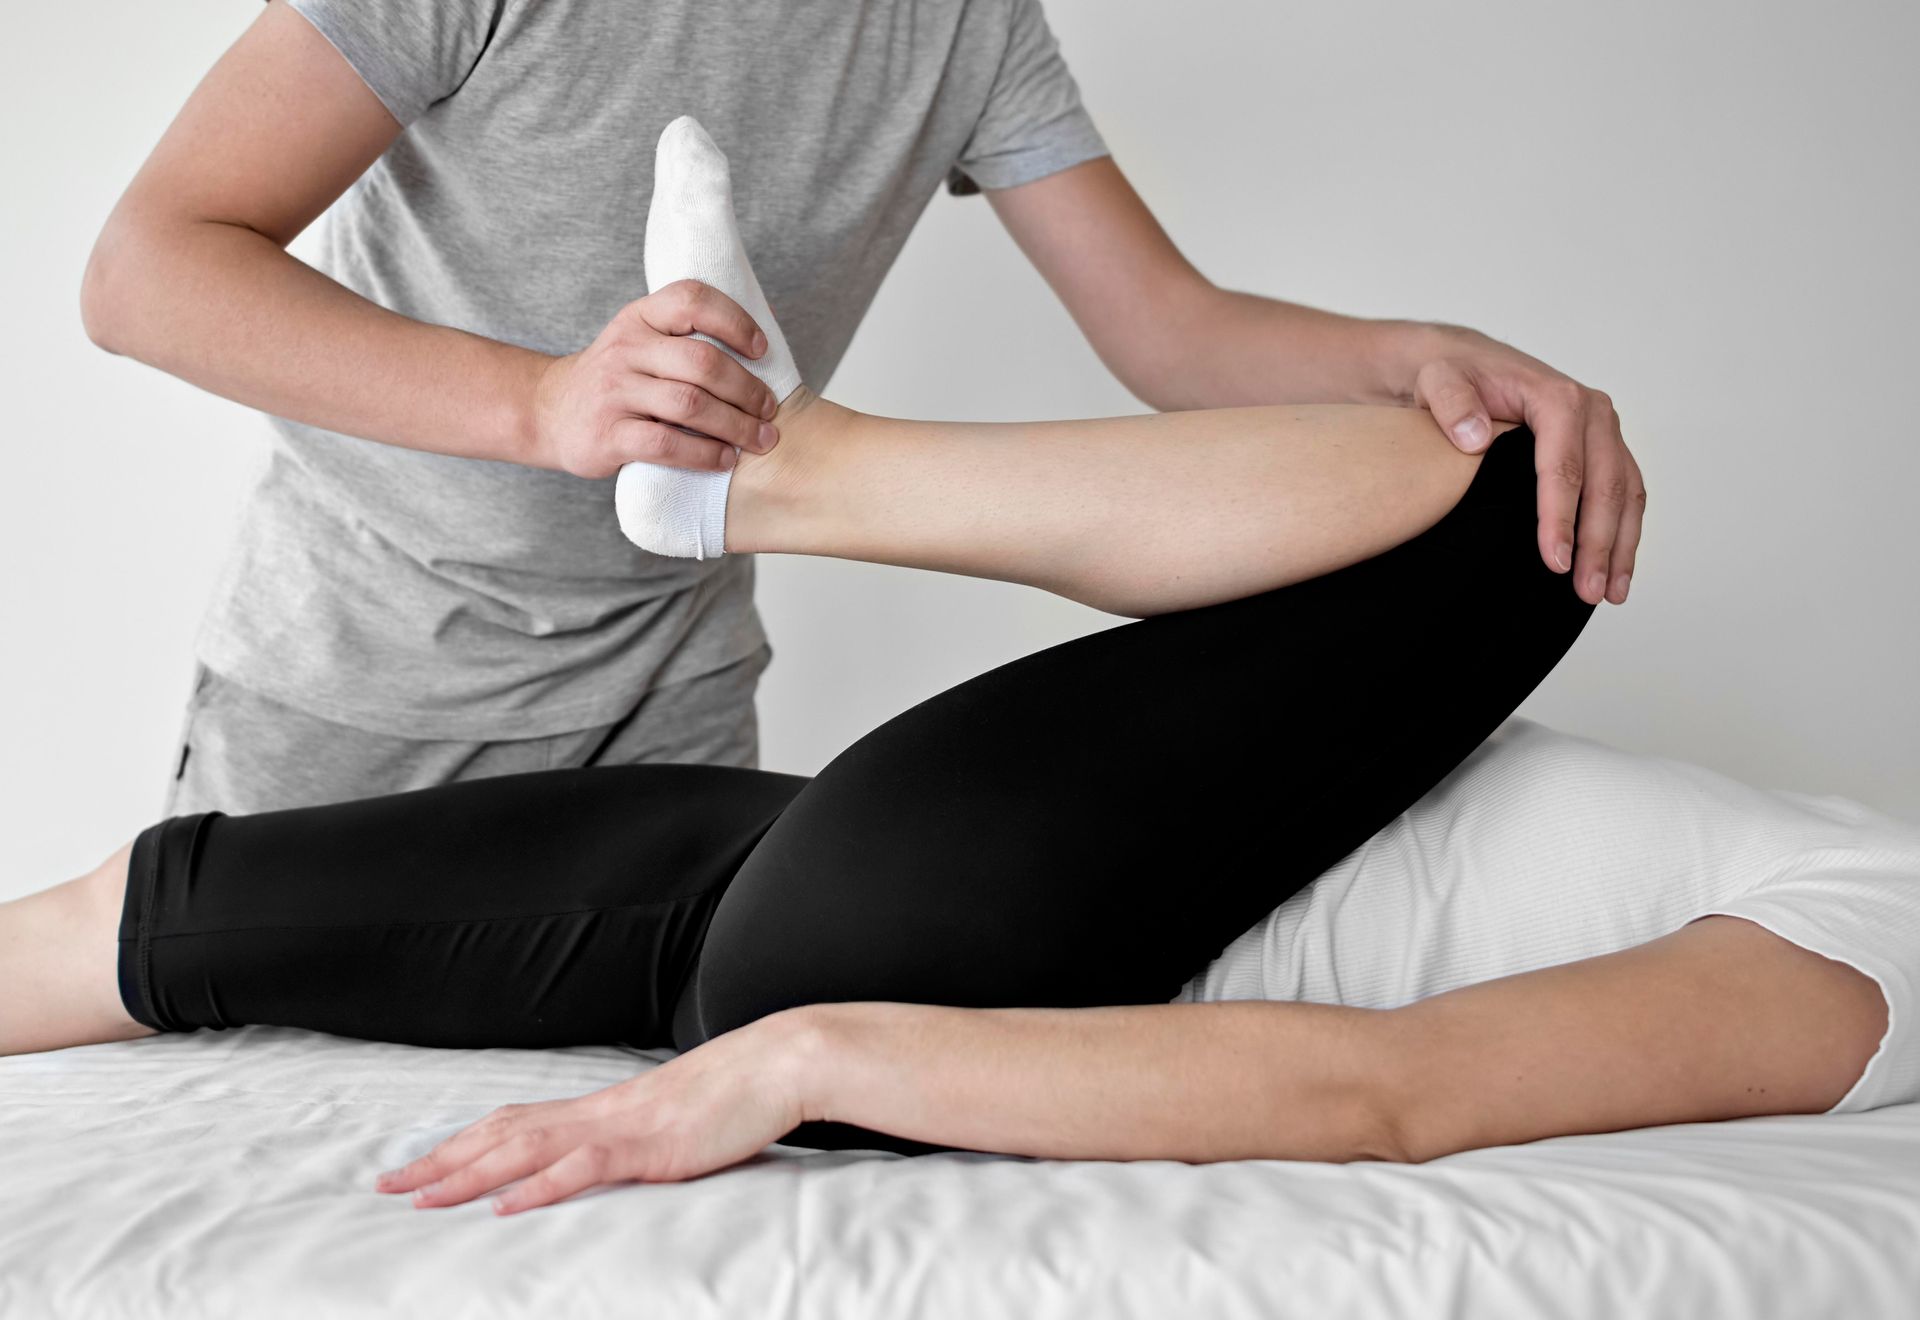 a man is stretching a woman 's leg on a bed .